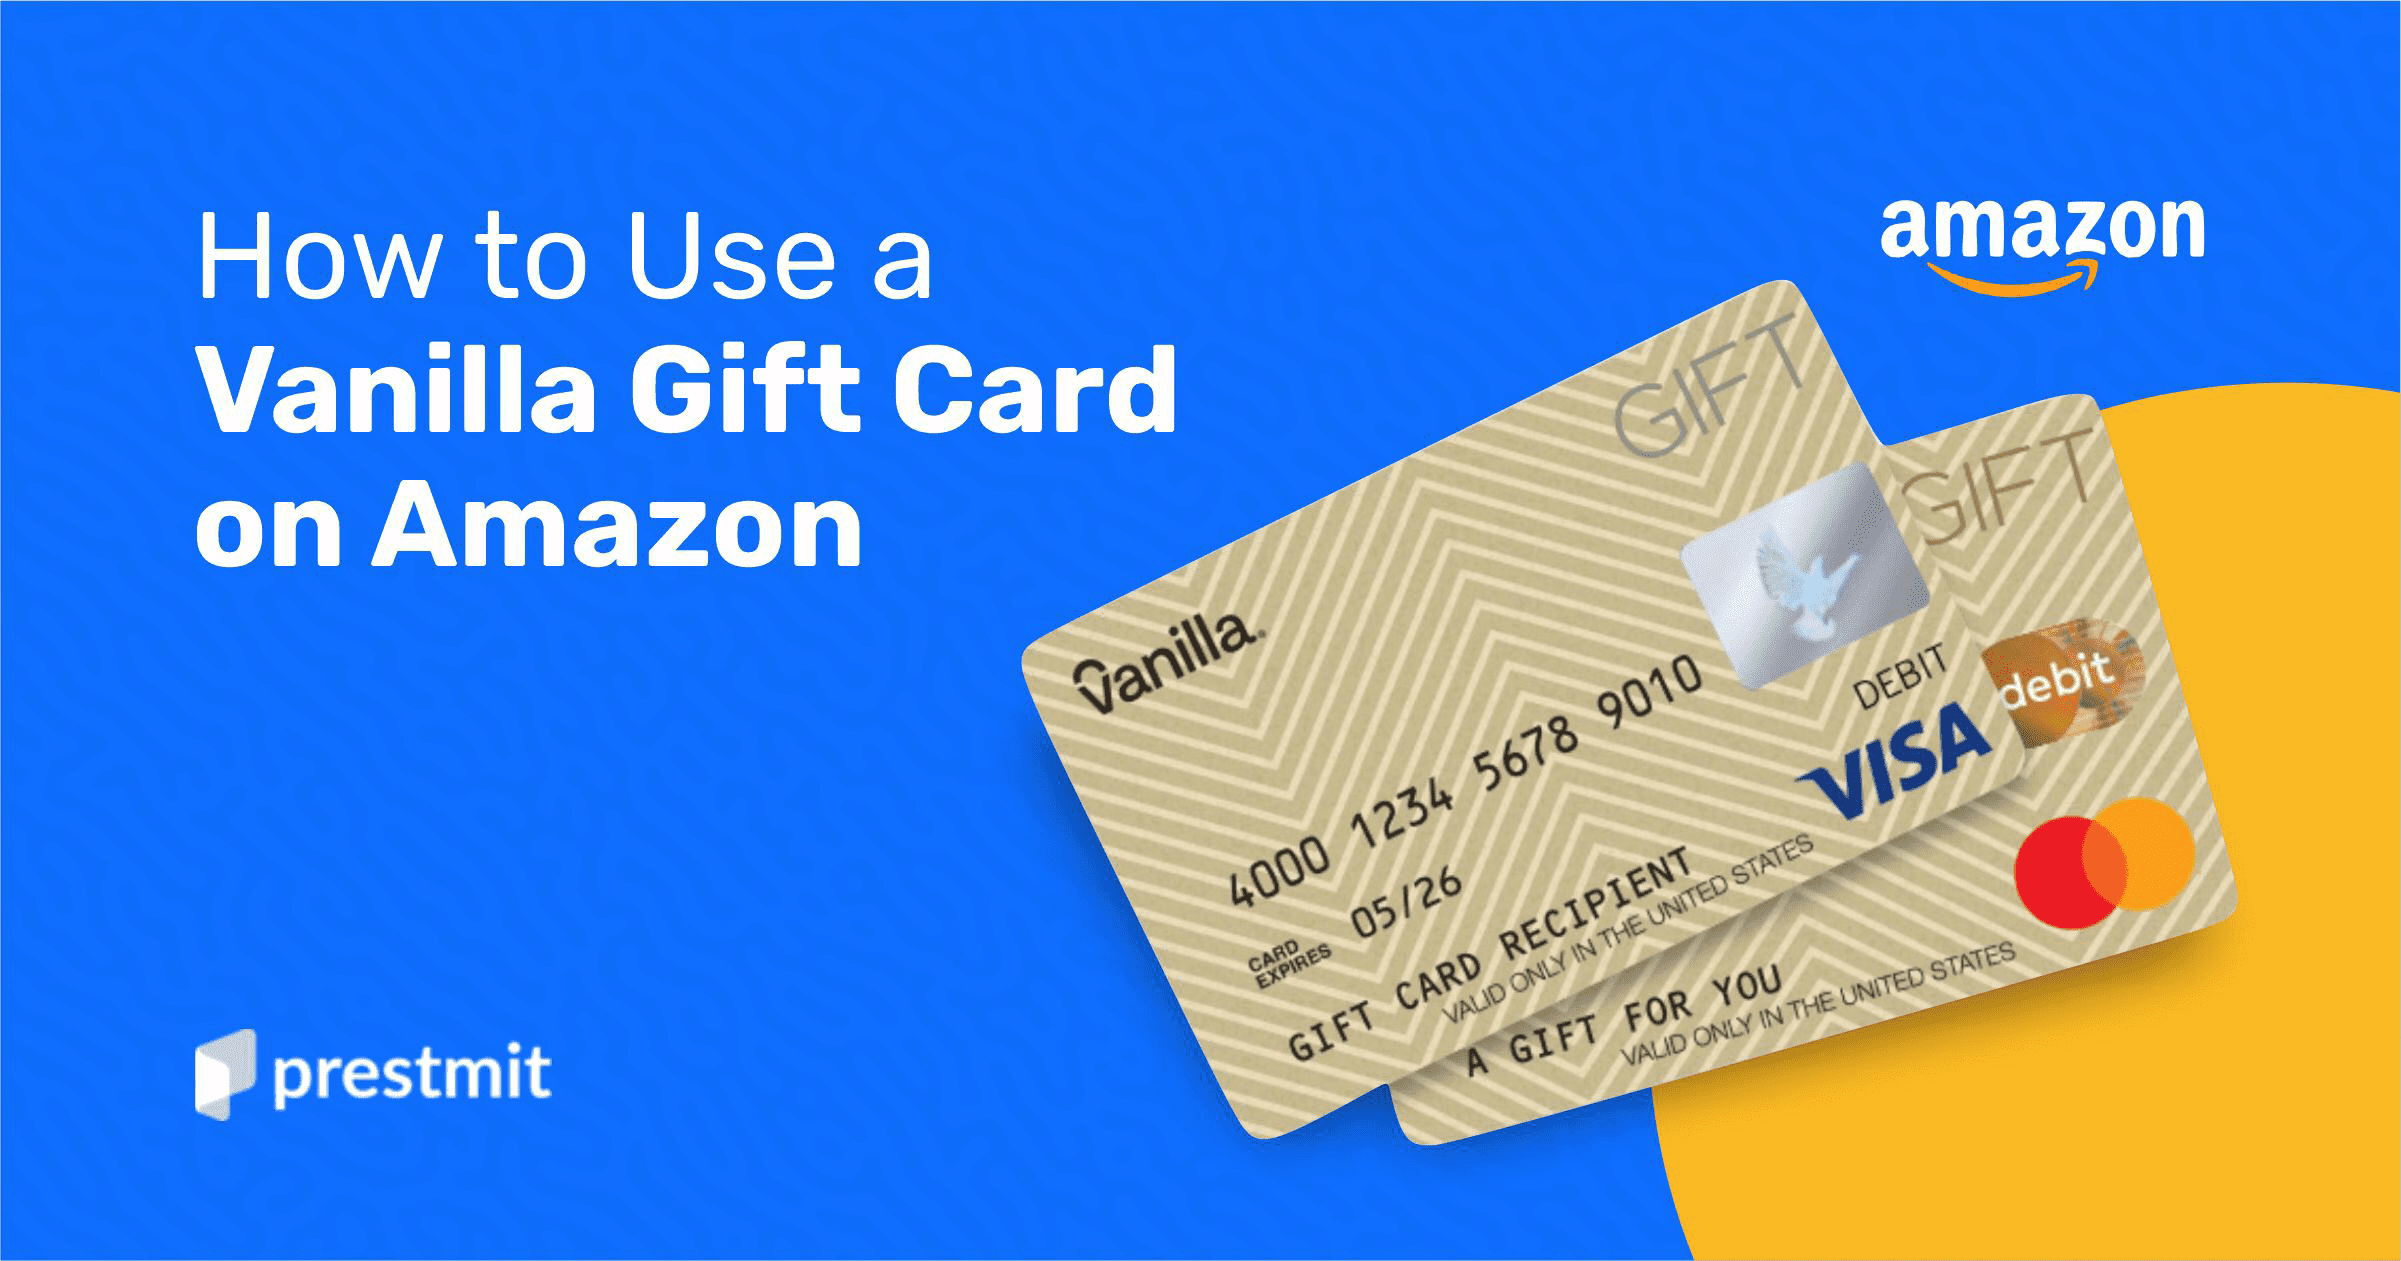 5 common gift card scams and how to spot them